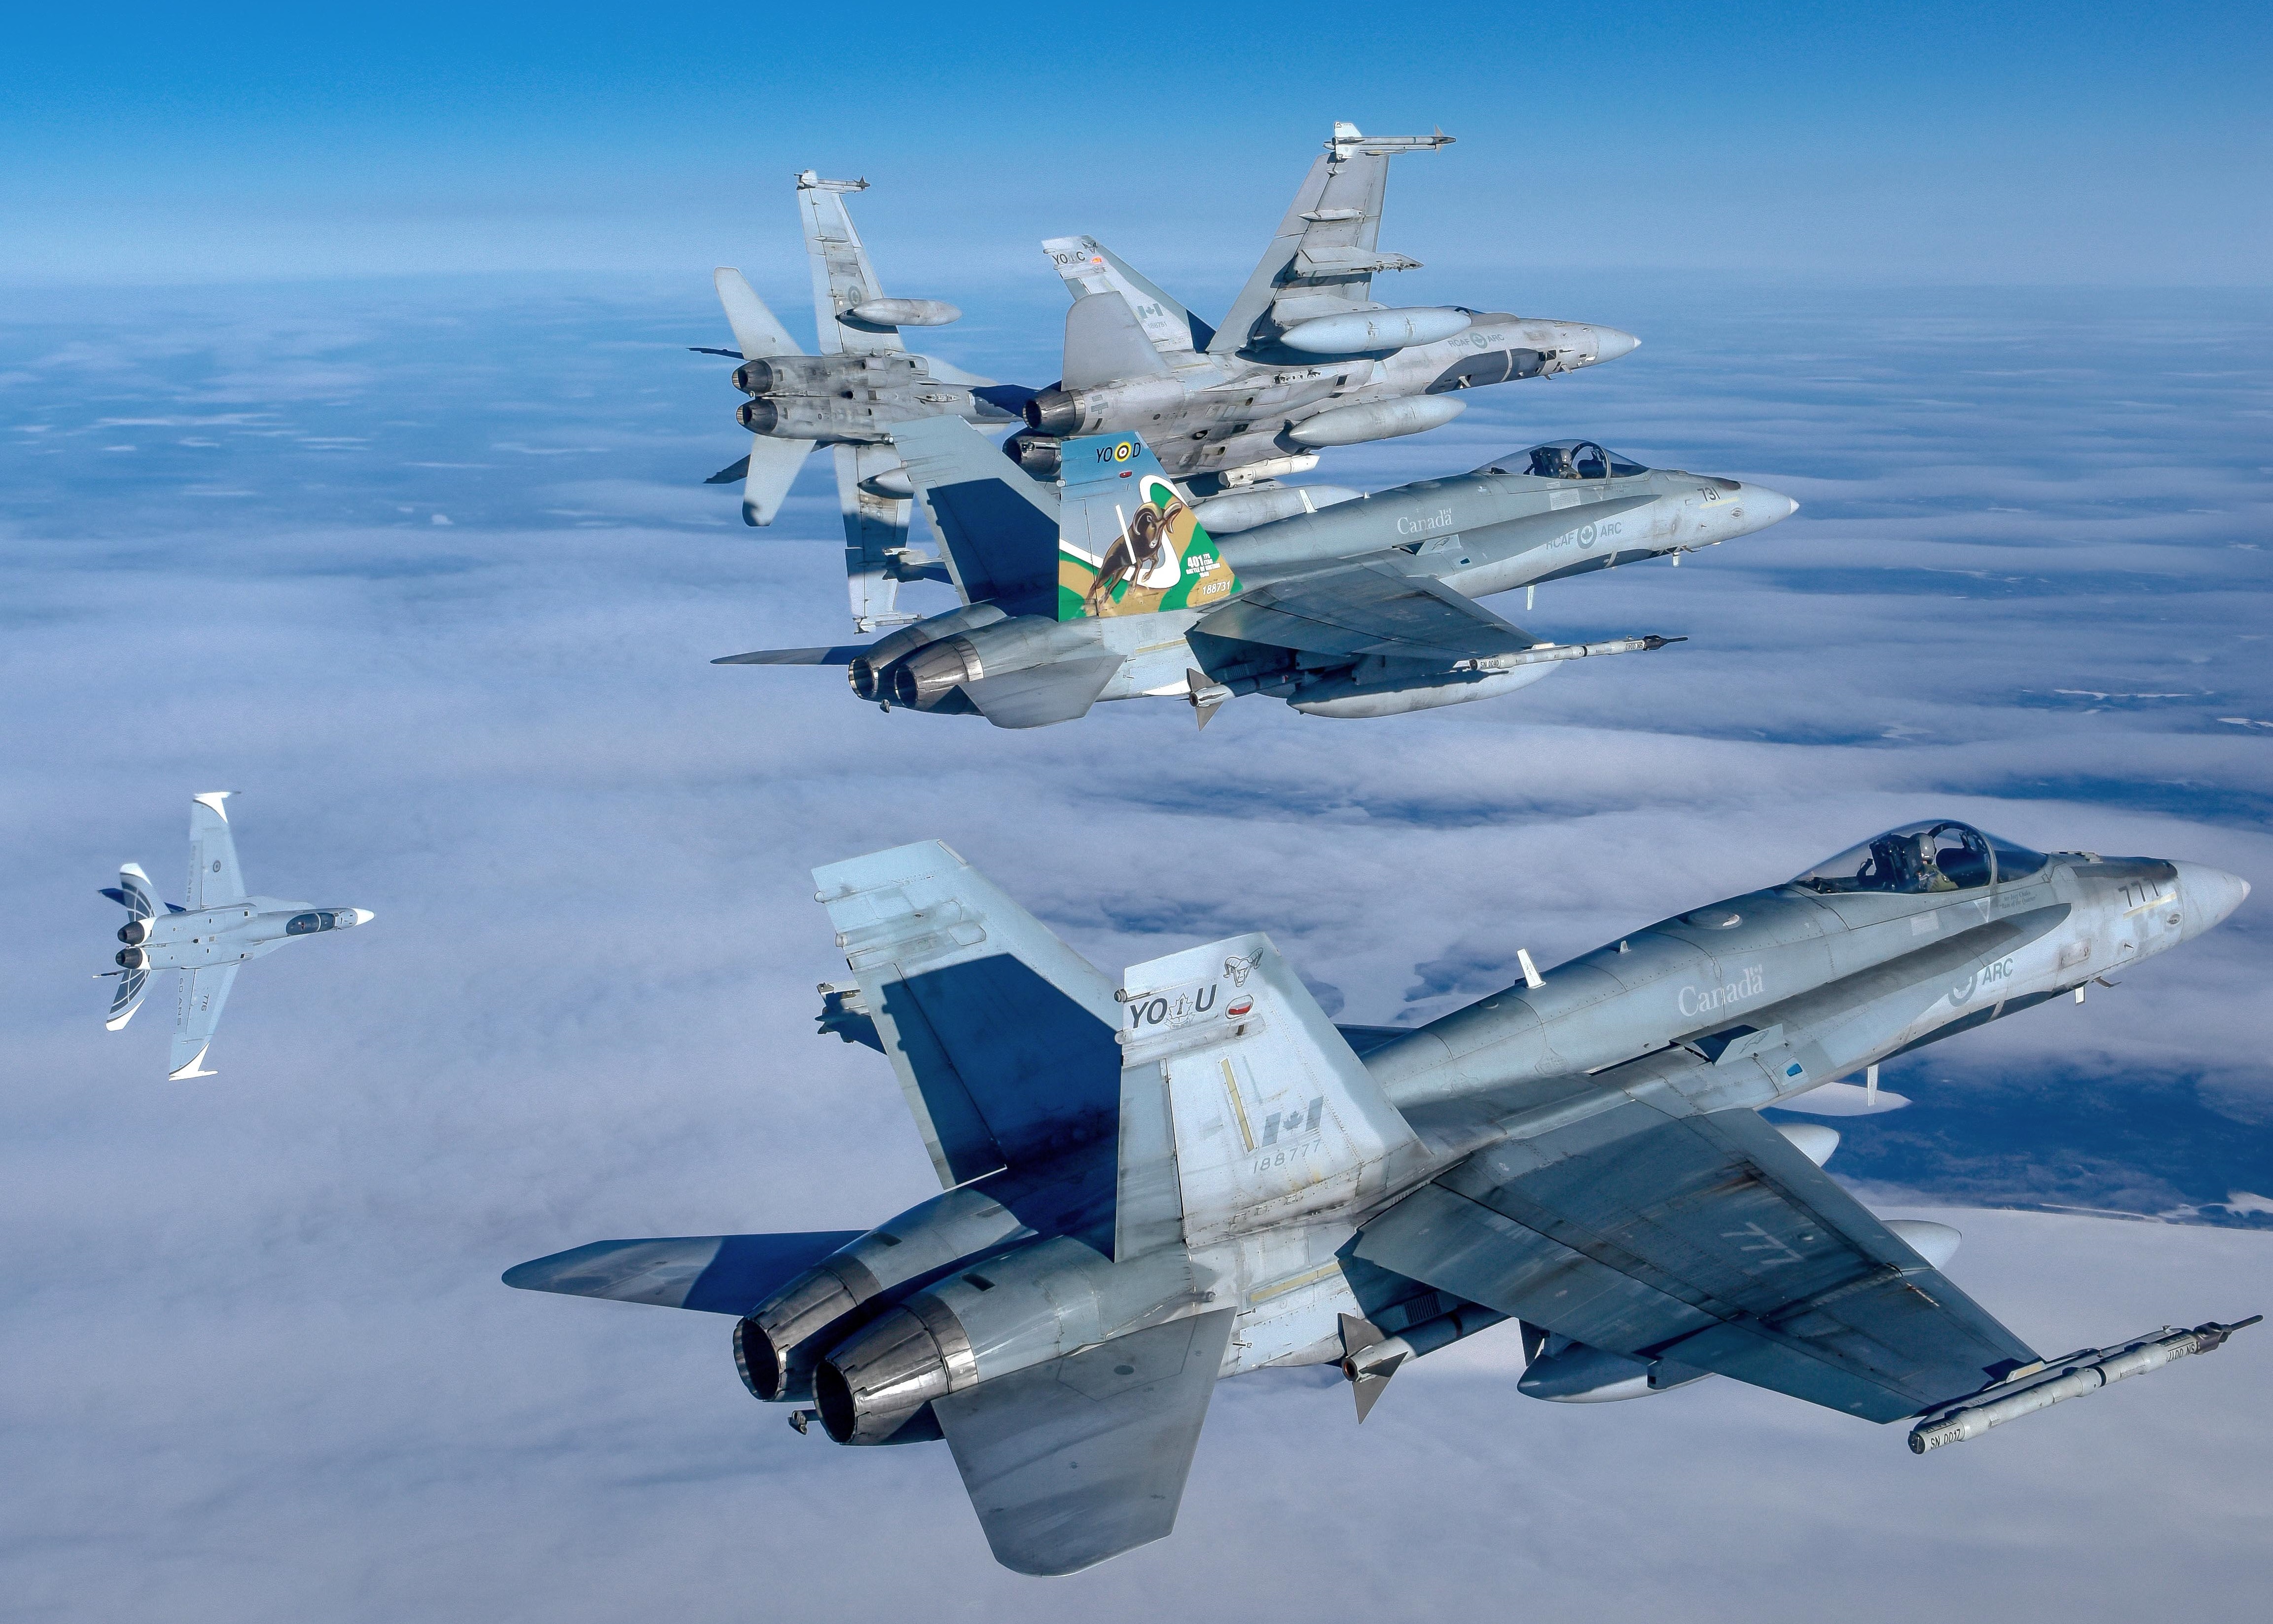 CF-188 Hornets from 401 Tactical Fighter Squadron at 4 Wing Cold Lake, Alta. Mike Reyno Photo